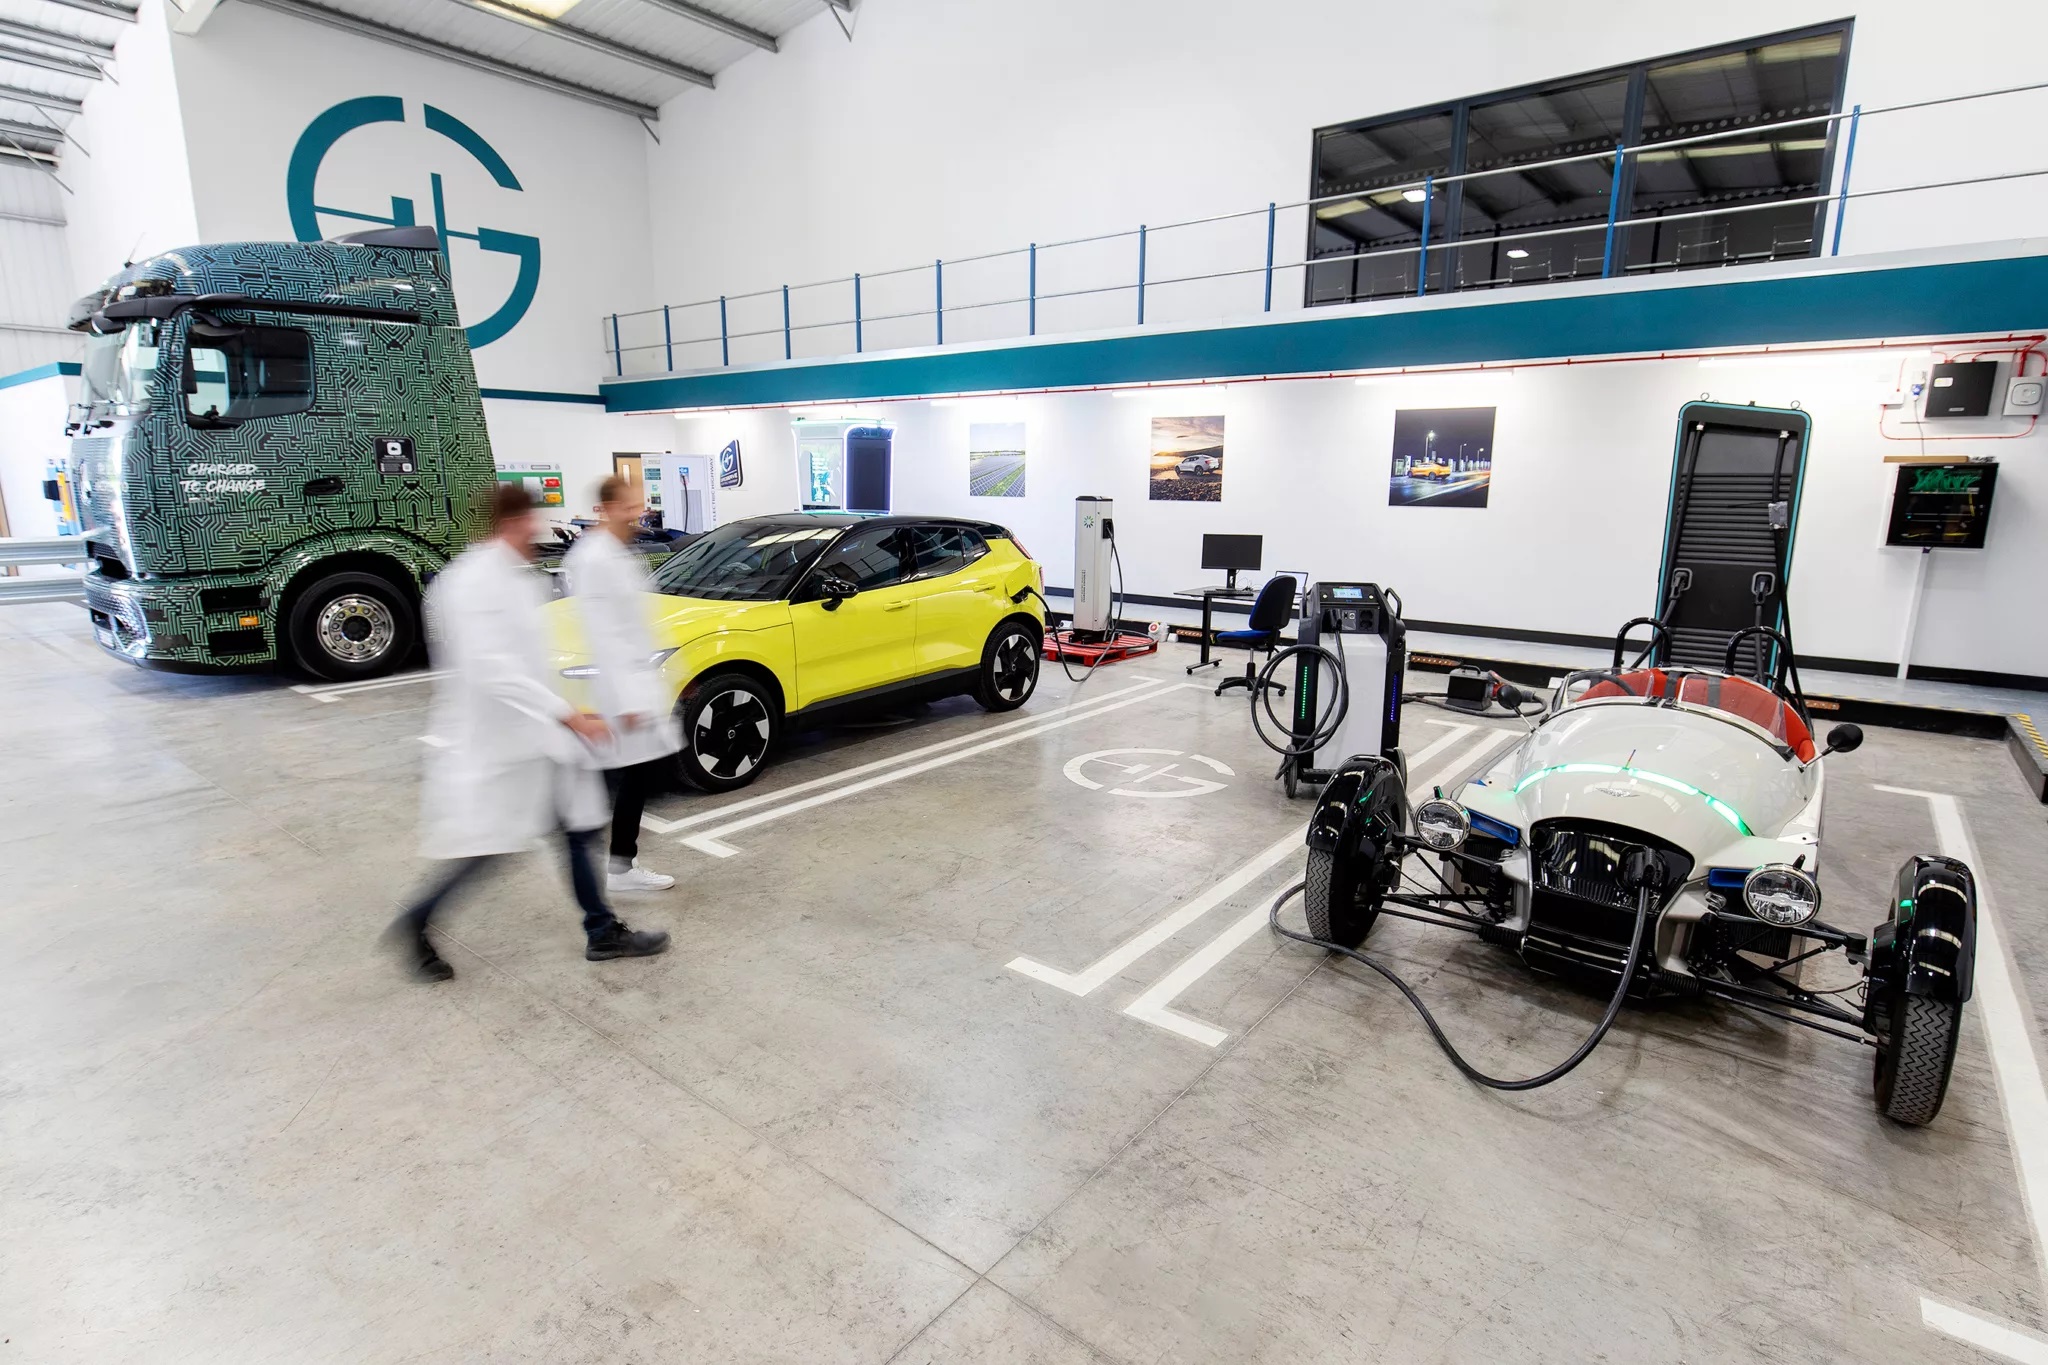 The new Gridserve testing laboratory in Swindon. Image: Gridserve